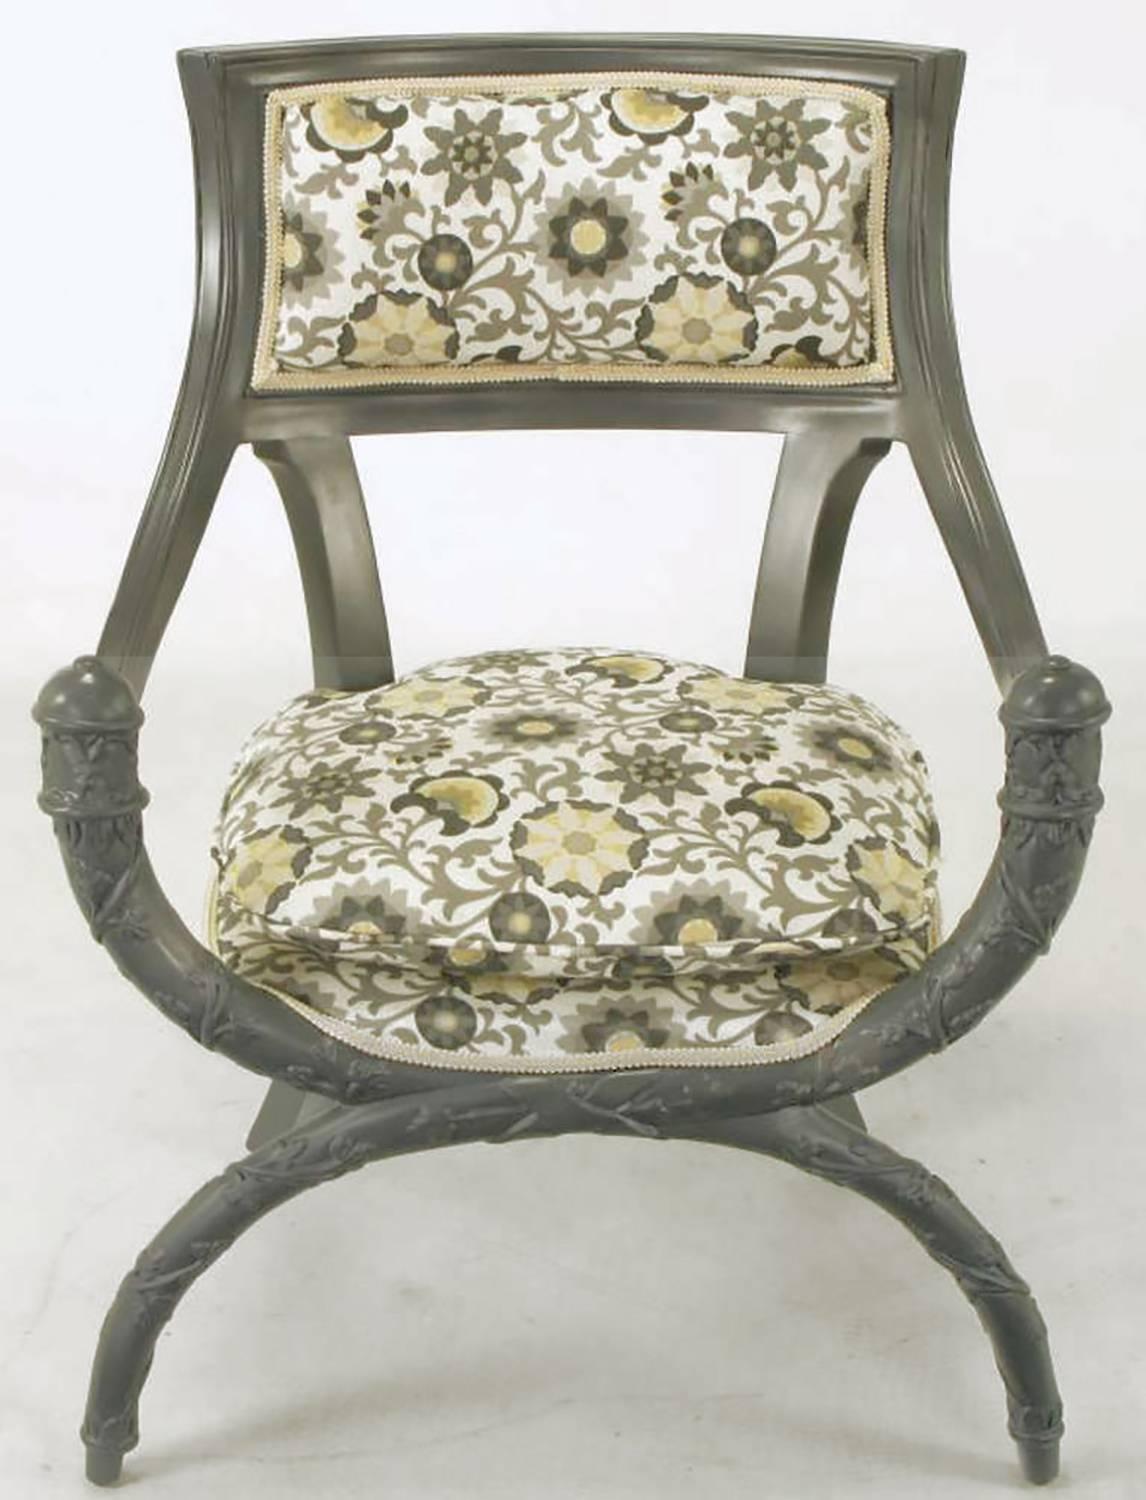 Pair of uncommon Curule front arm chairs in updated slate gray lacquer over wood. Seats and backs are upholstered in a modern gray and saffron print on white cotton. Deep sloped arms and rear saber legs complement the rounded seat and carved vine